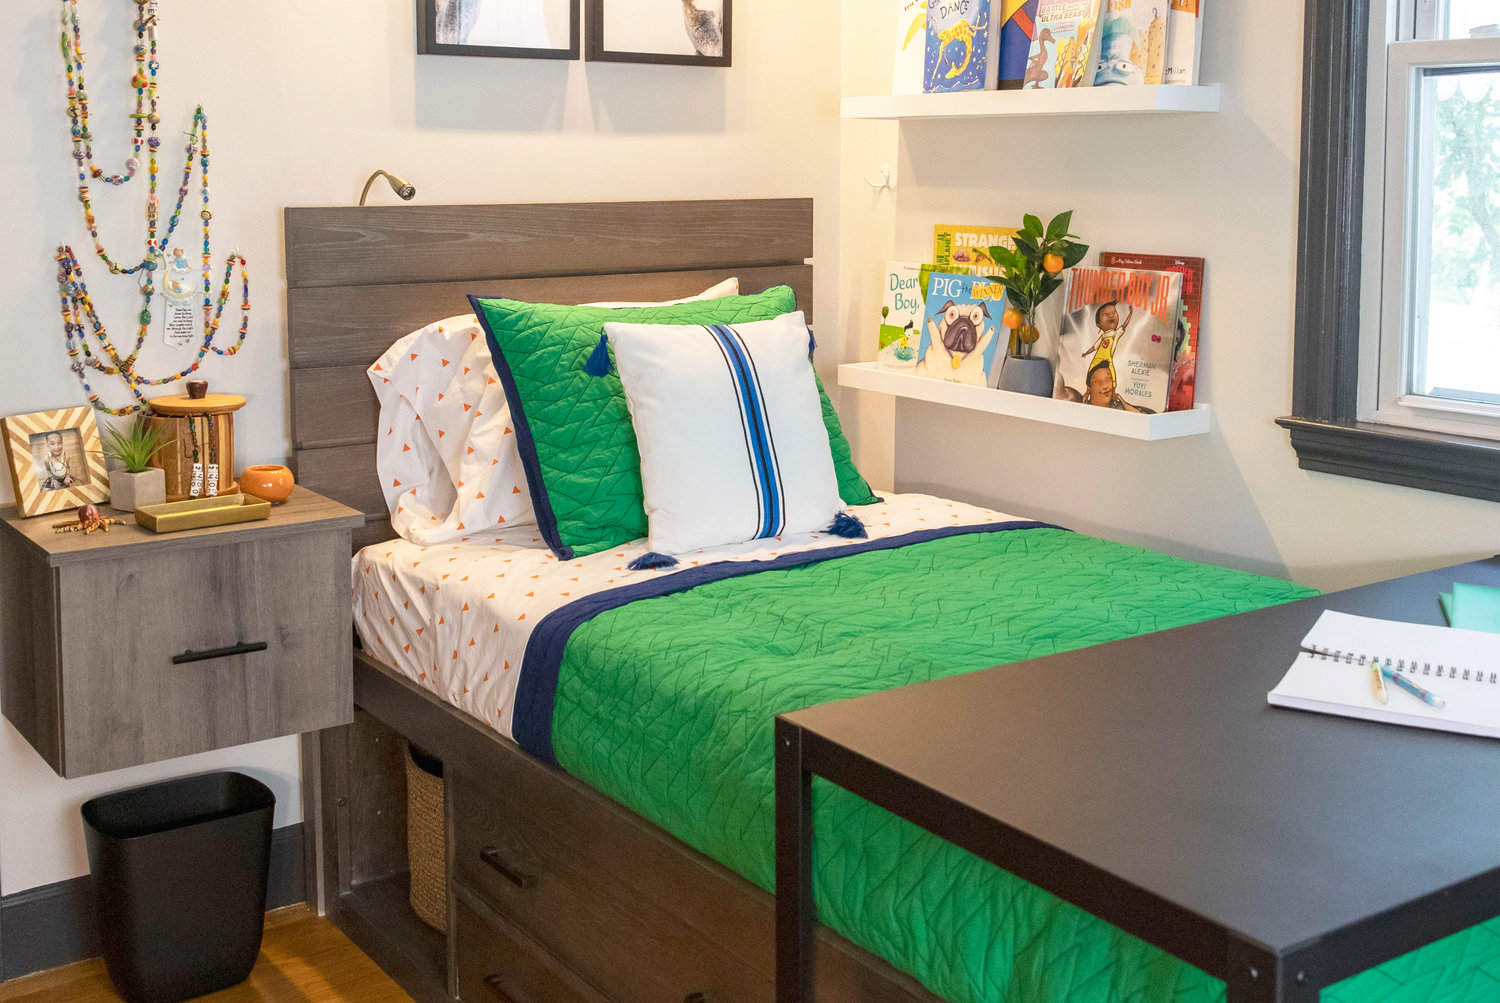 Designer-run nonprofit transforms deserving kids’ rooms into spaces for healing